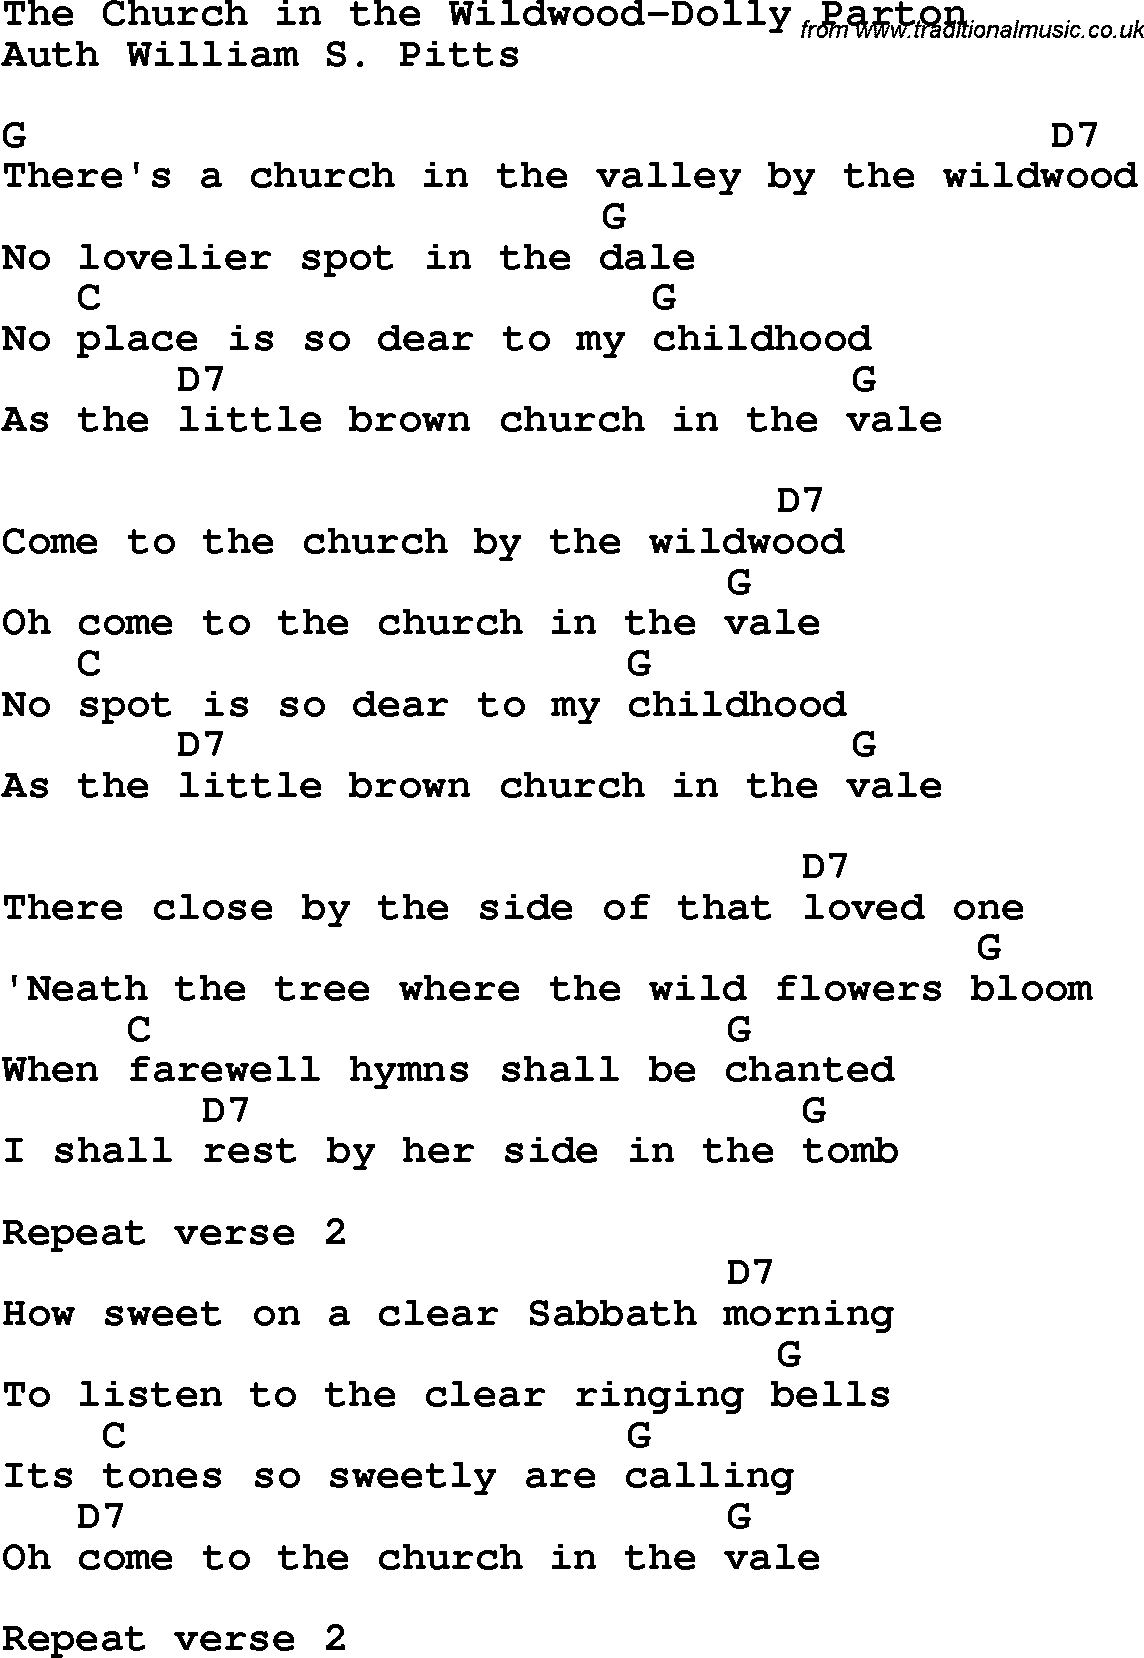 Country, Southern and Bluegrass Gospel Song The Church in the Wildwood-Dolly Parton lyrics and chords